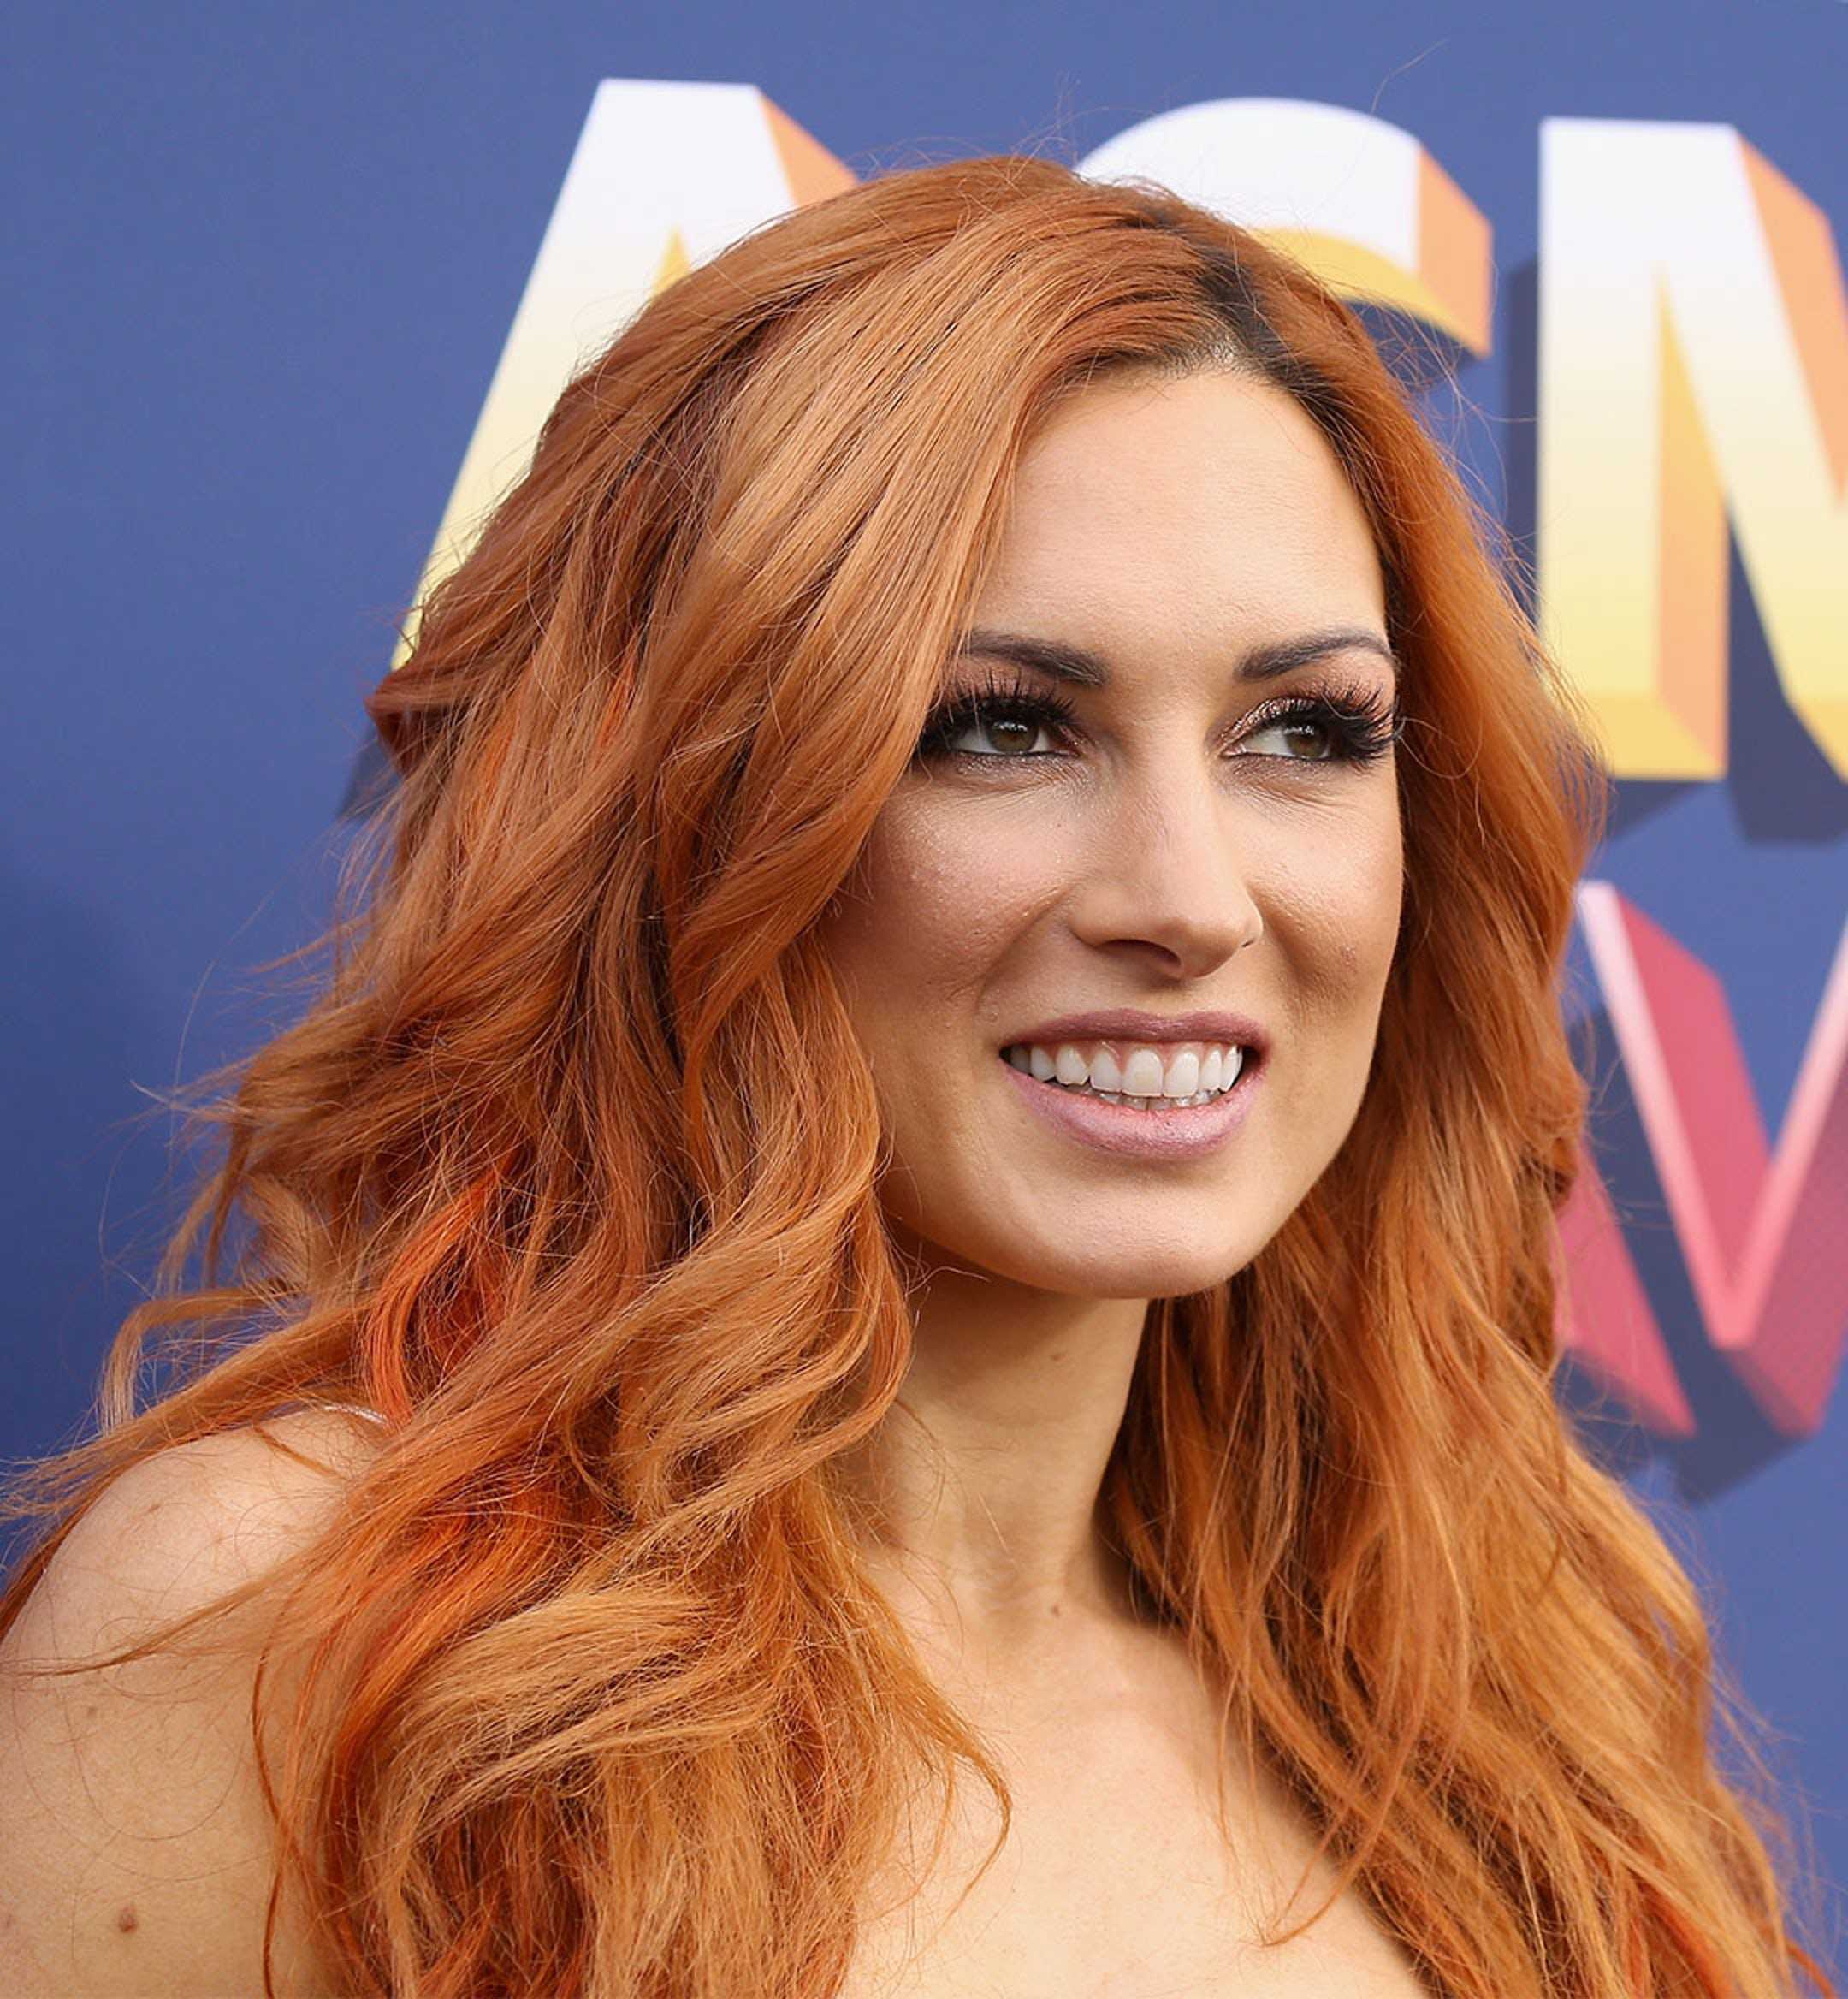 70+ Hot And Sexy Pictures of Becky Lynch – WWE Diva Will Sizzle You Up 20